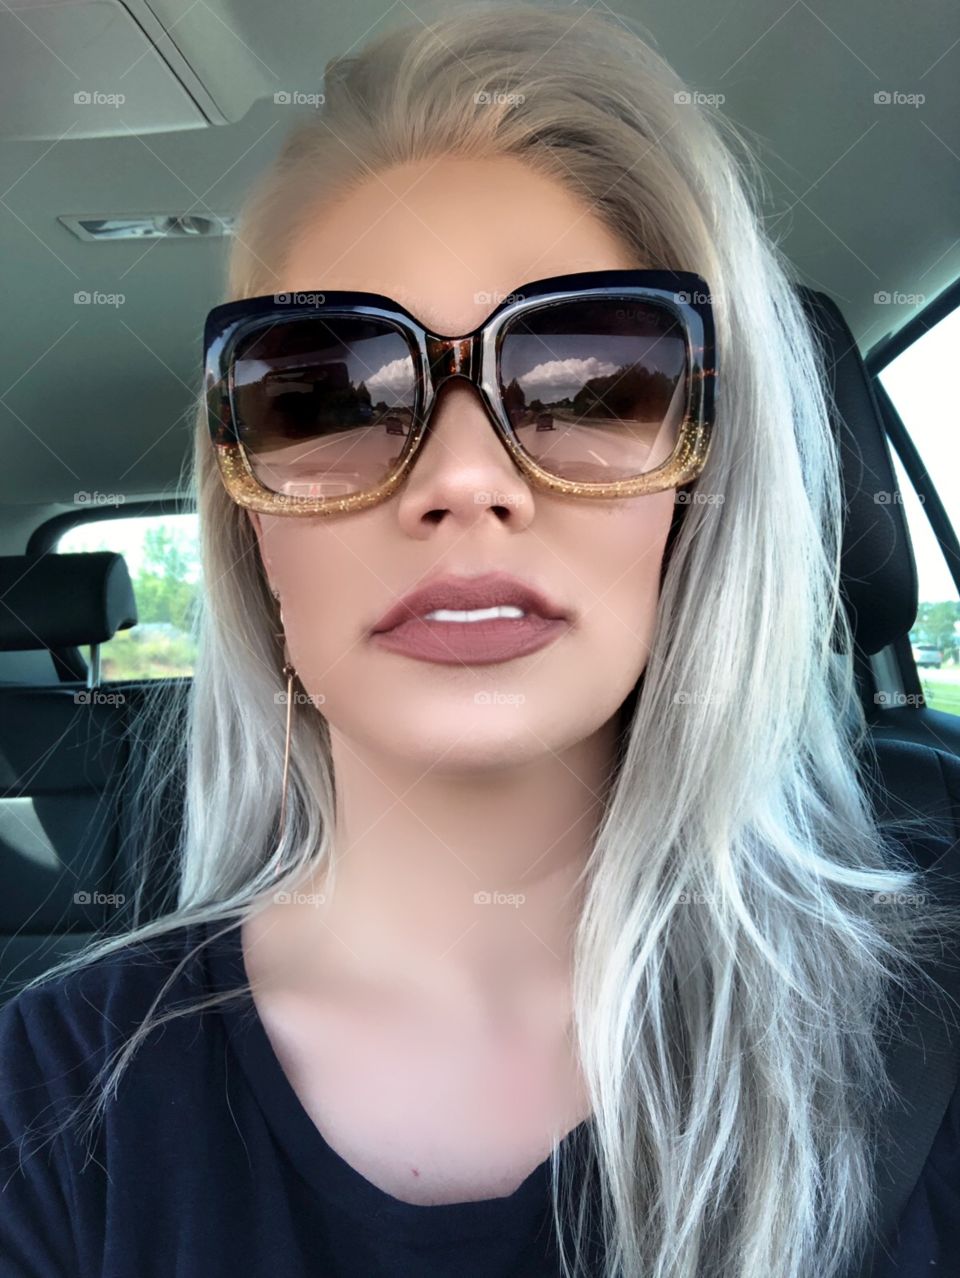 Gucci sunglasses for me, love the way they fit my face.  The square shape is perfect and keeps all sun out.  Don’t worry I was stopped while taking this selfie.  Safety first.